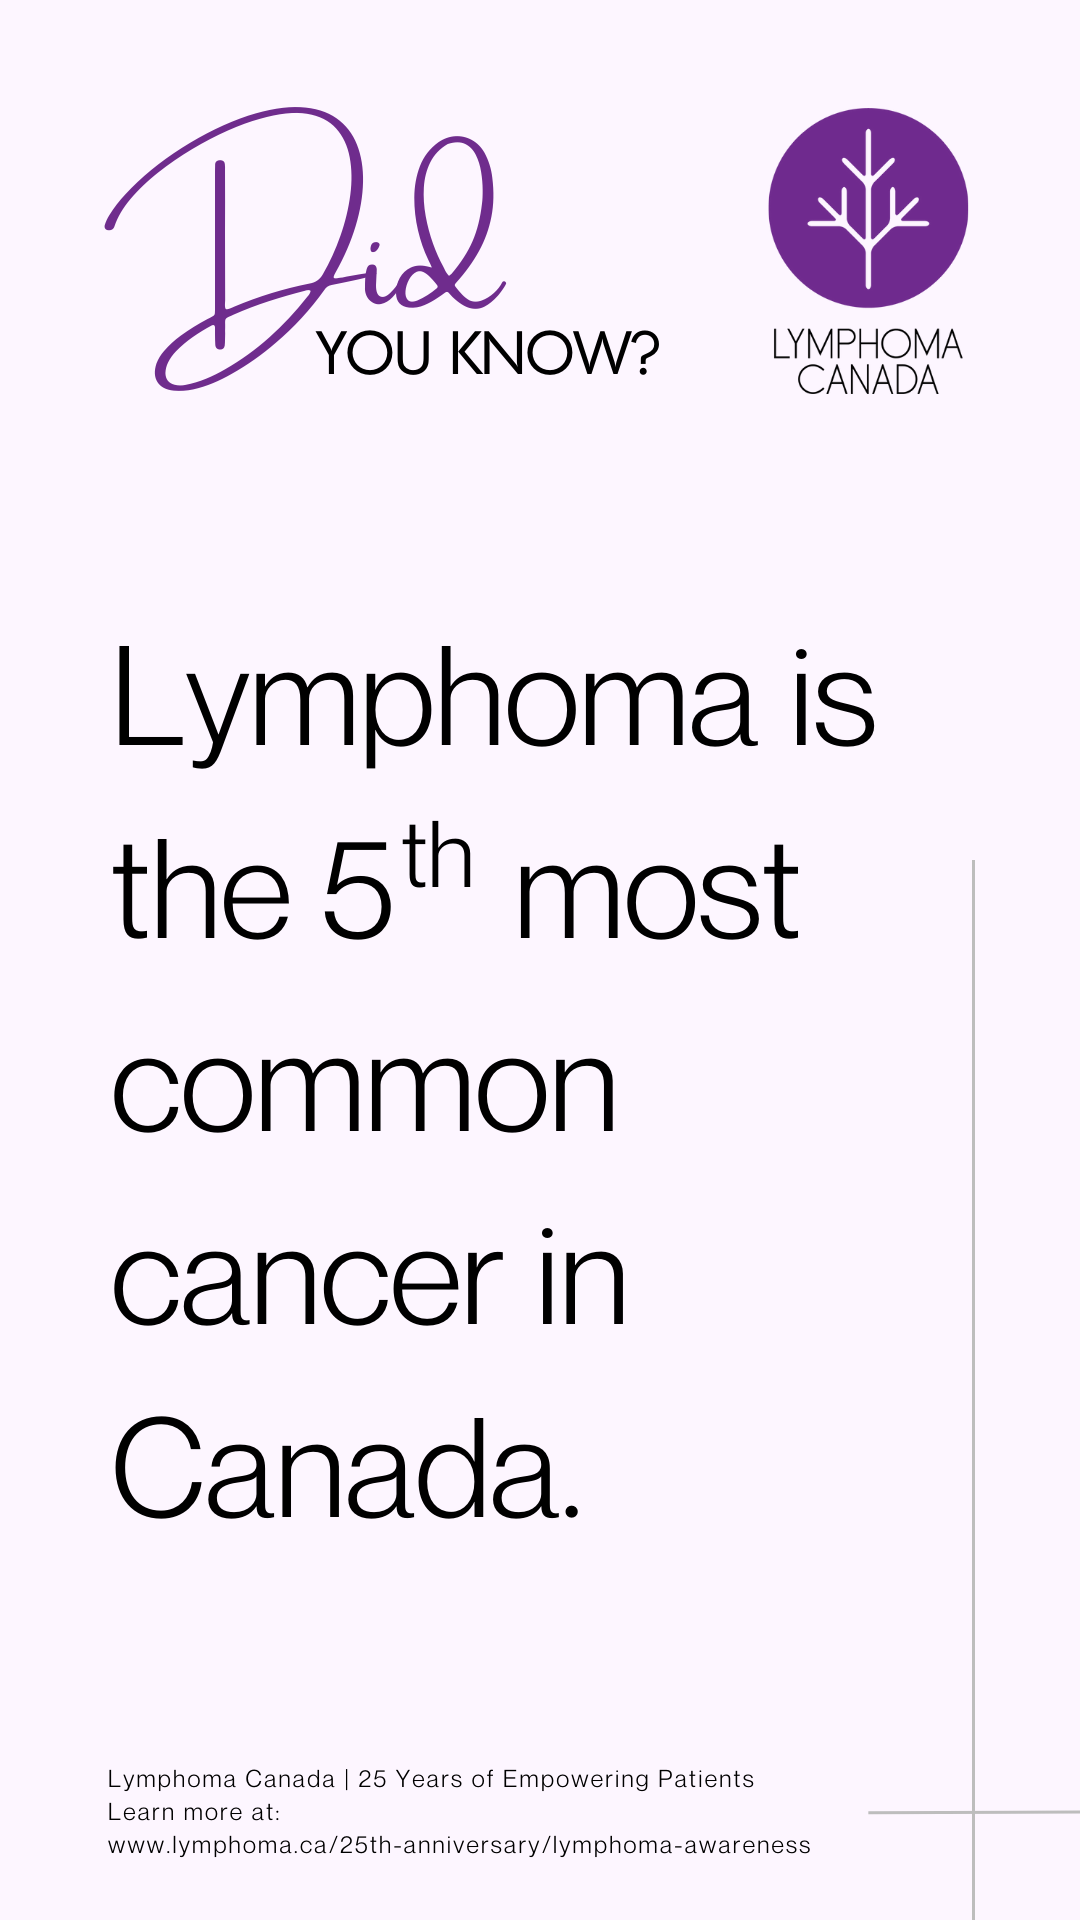 Story Infographic - Lymphoma is the 5th most common cancer in Canada